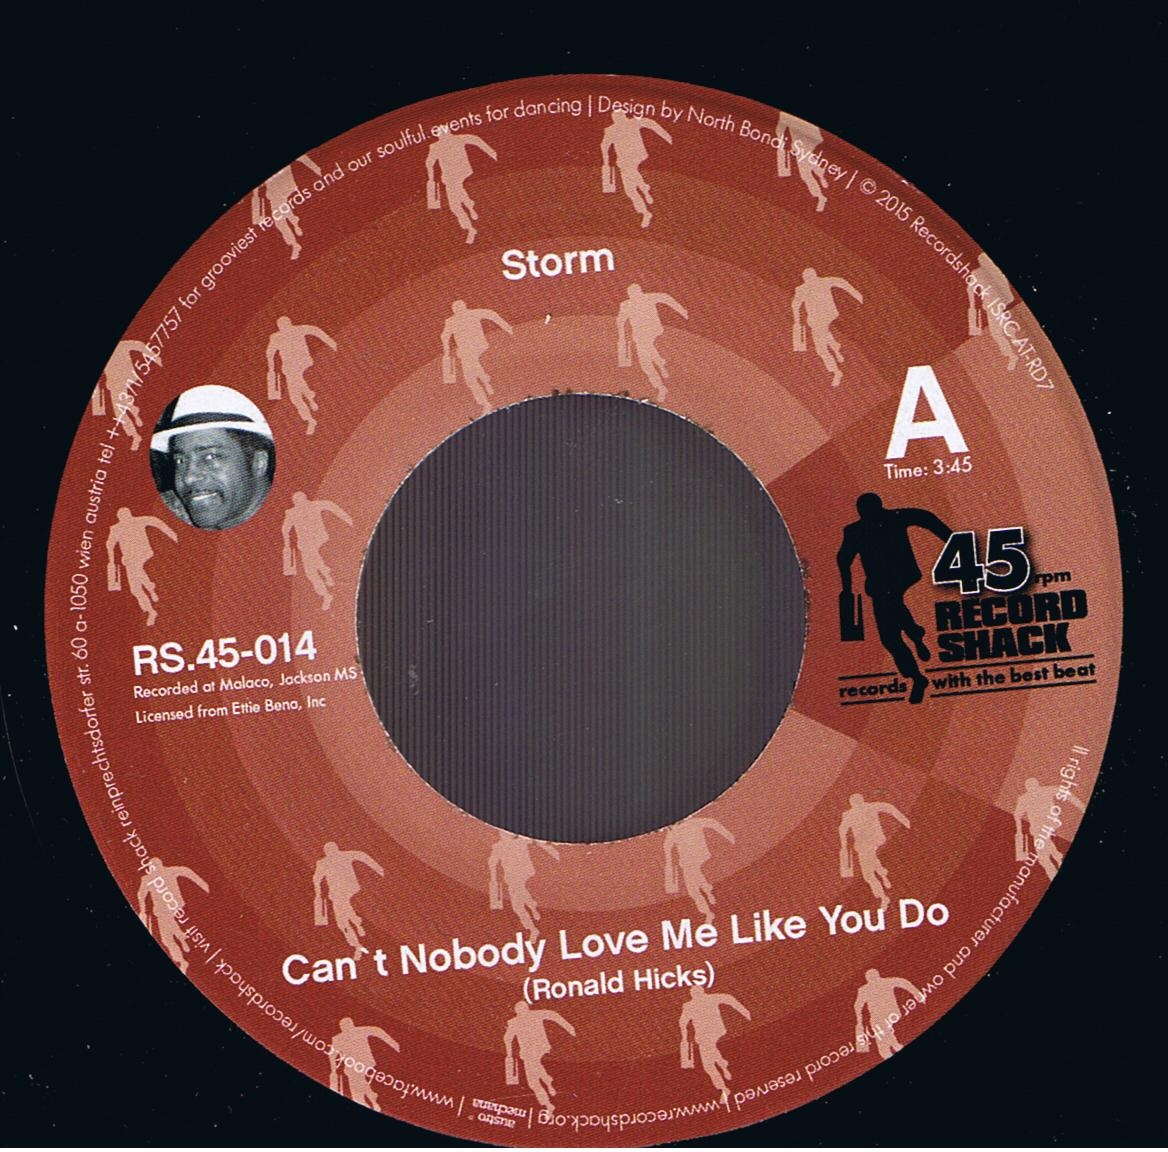 Storm - Can't Nobody Love Me Like You Do / Storm - Can't Nobody Love Me Like You Do(BTO Spider Disco Mix) (7") 